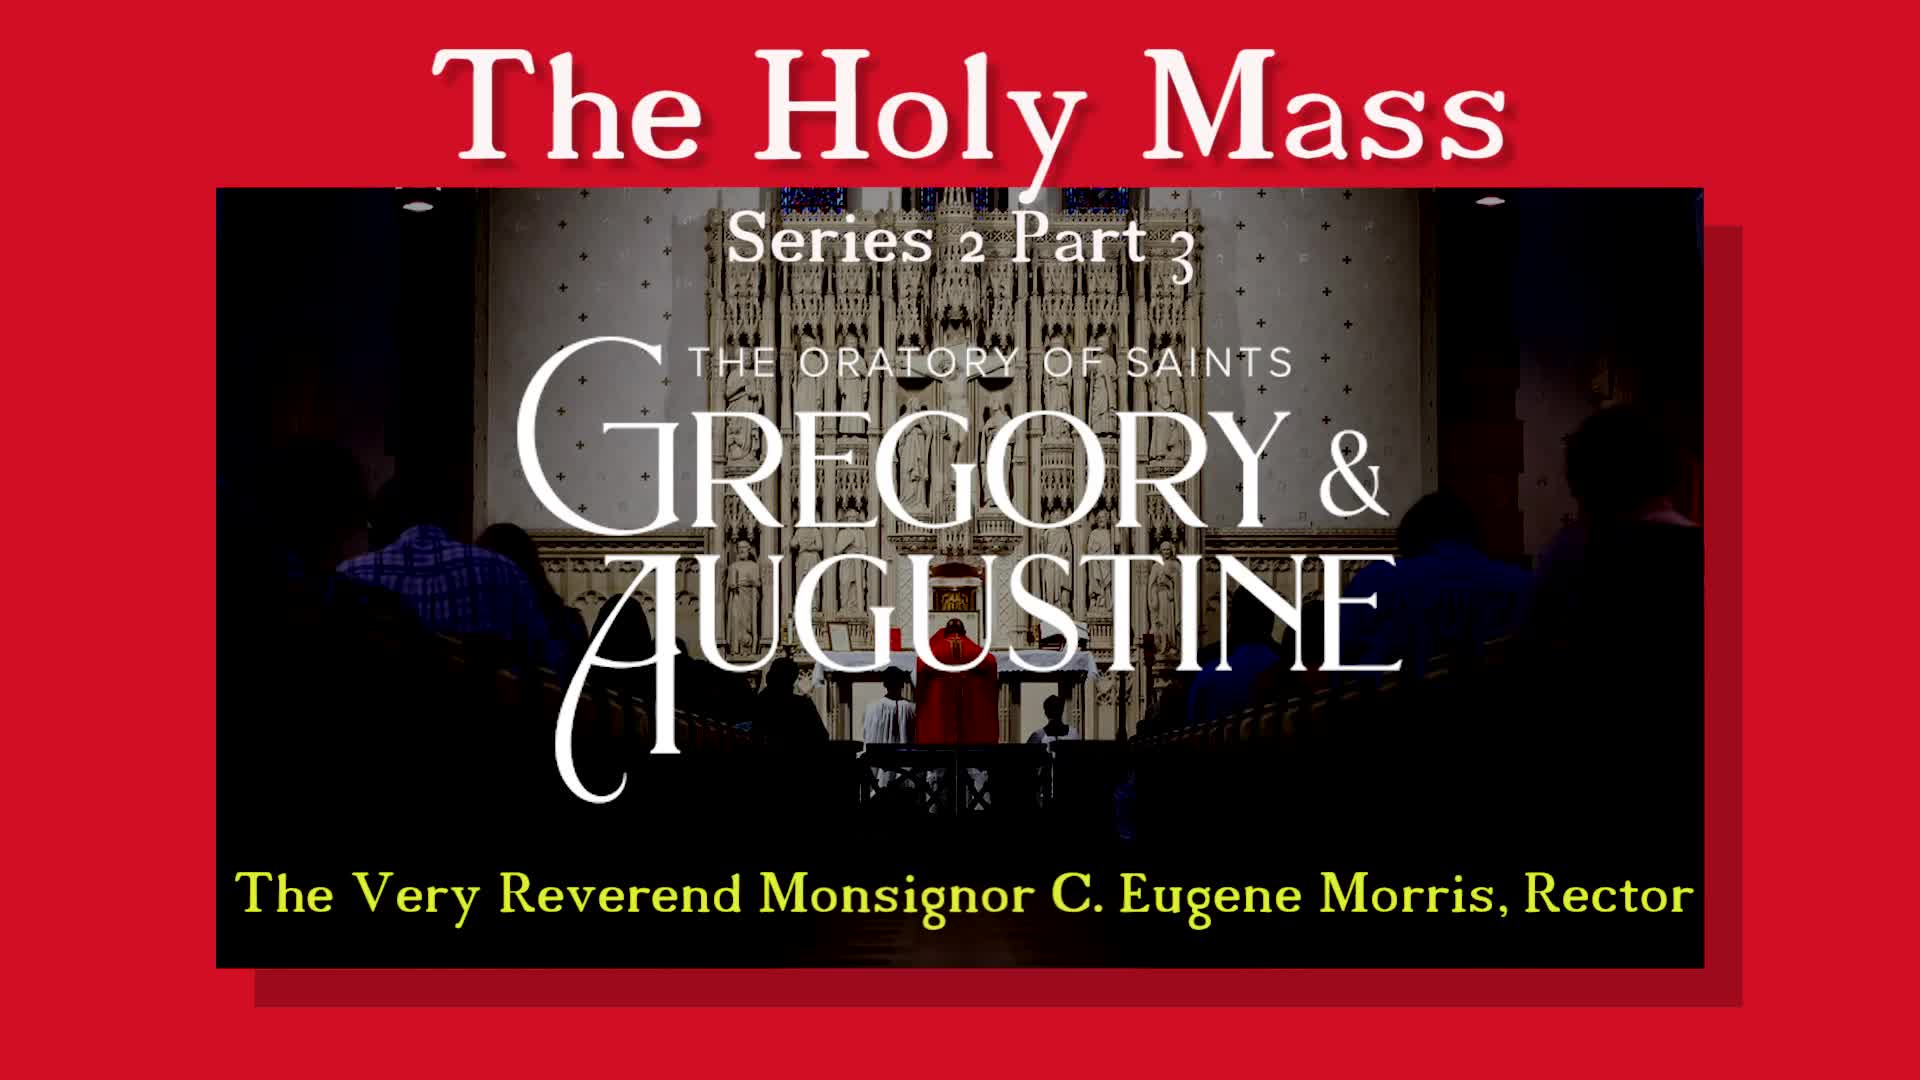 The Holy Mass Series 2 Part 3